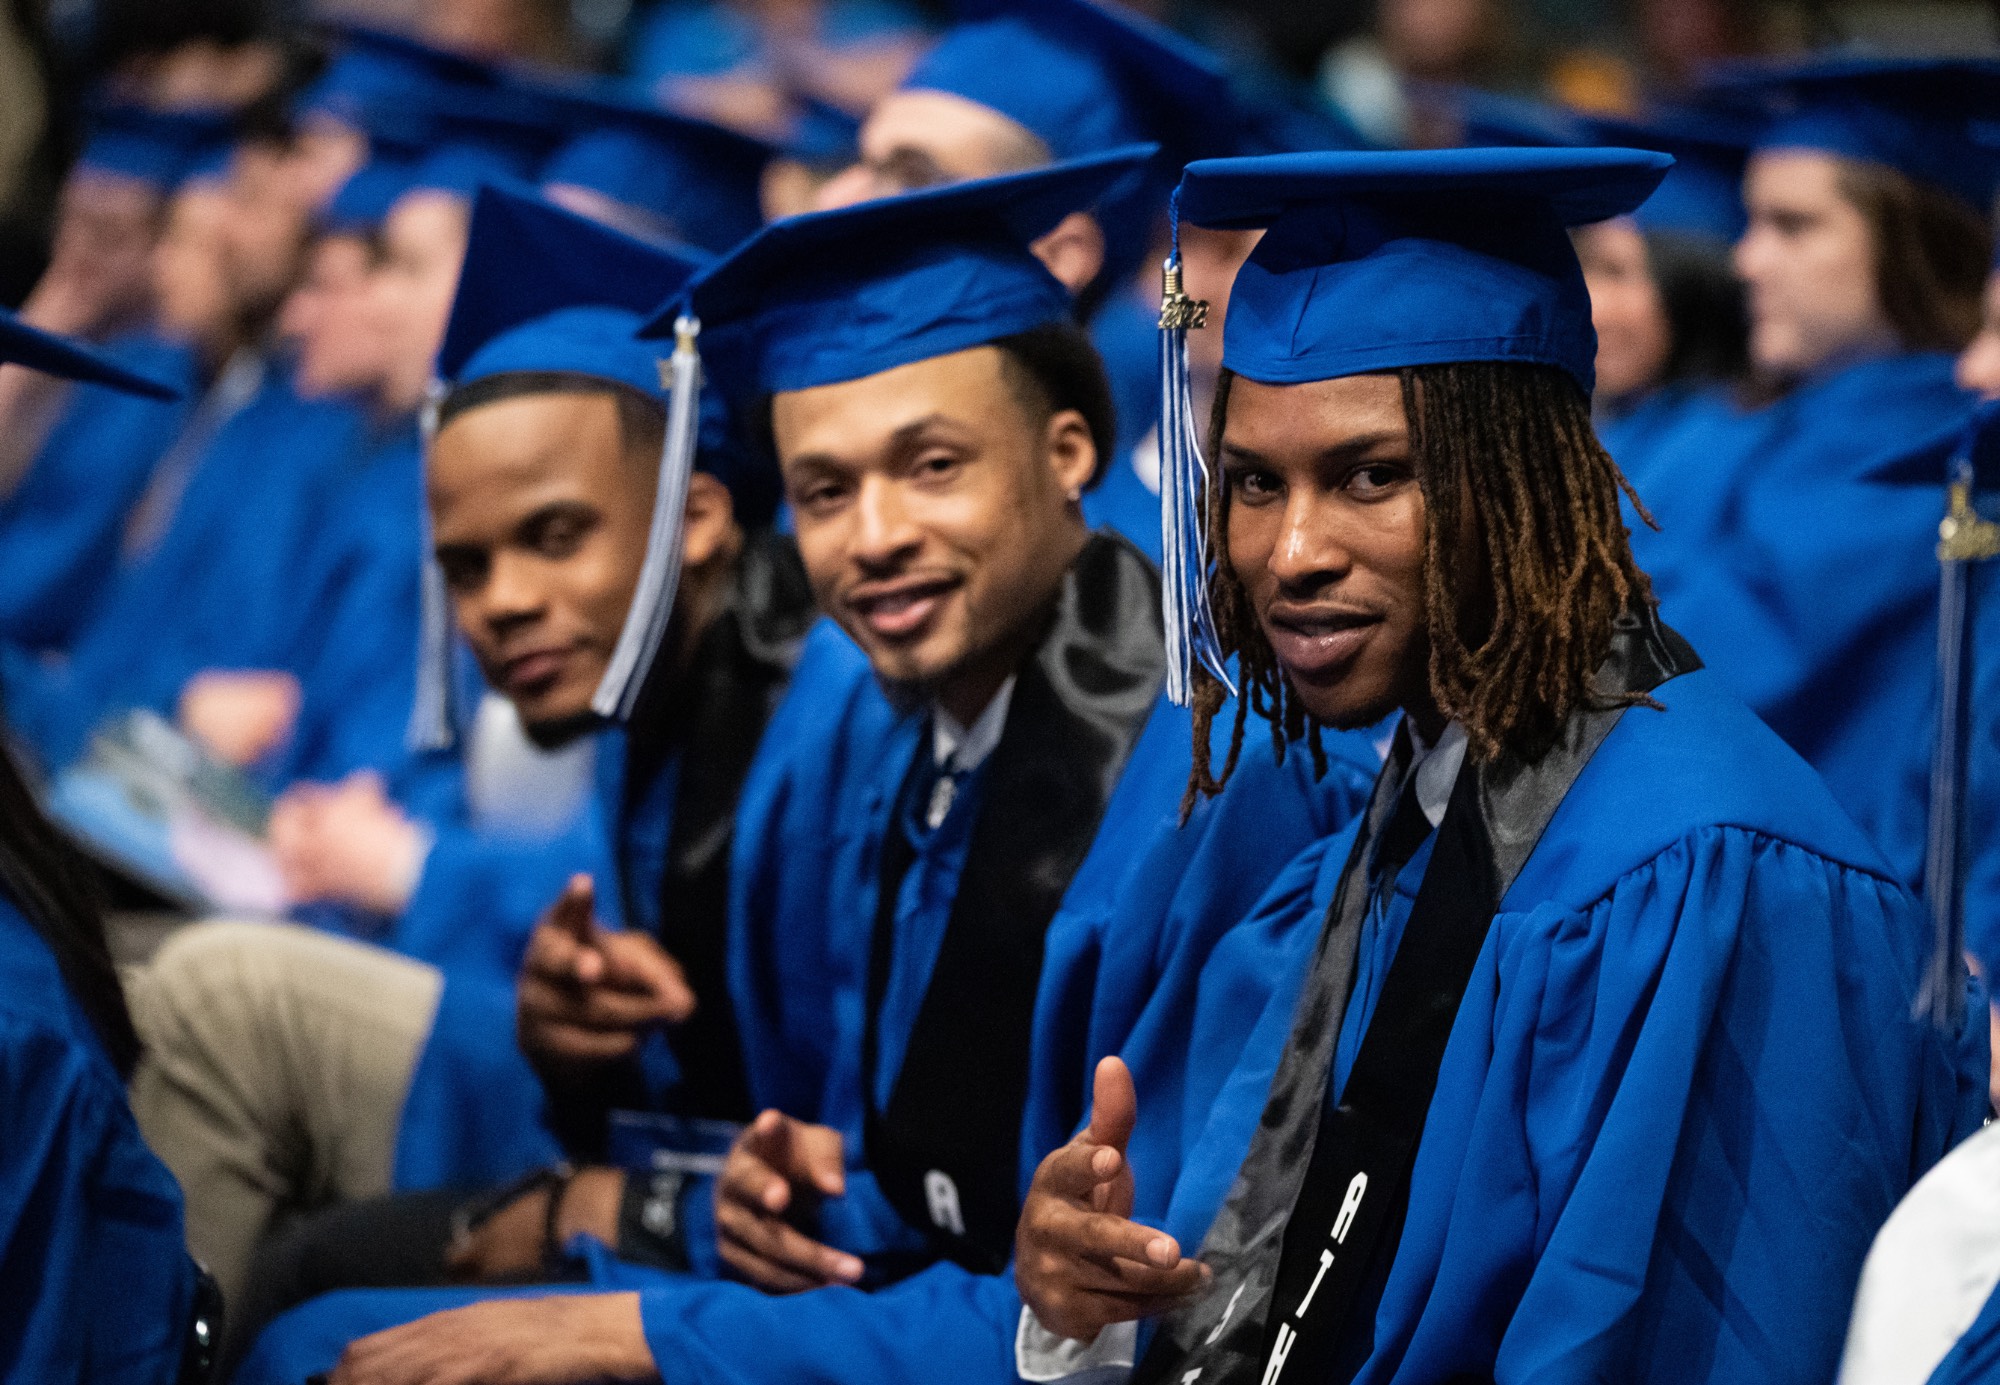 students smiling and pointing at camera at commencement